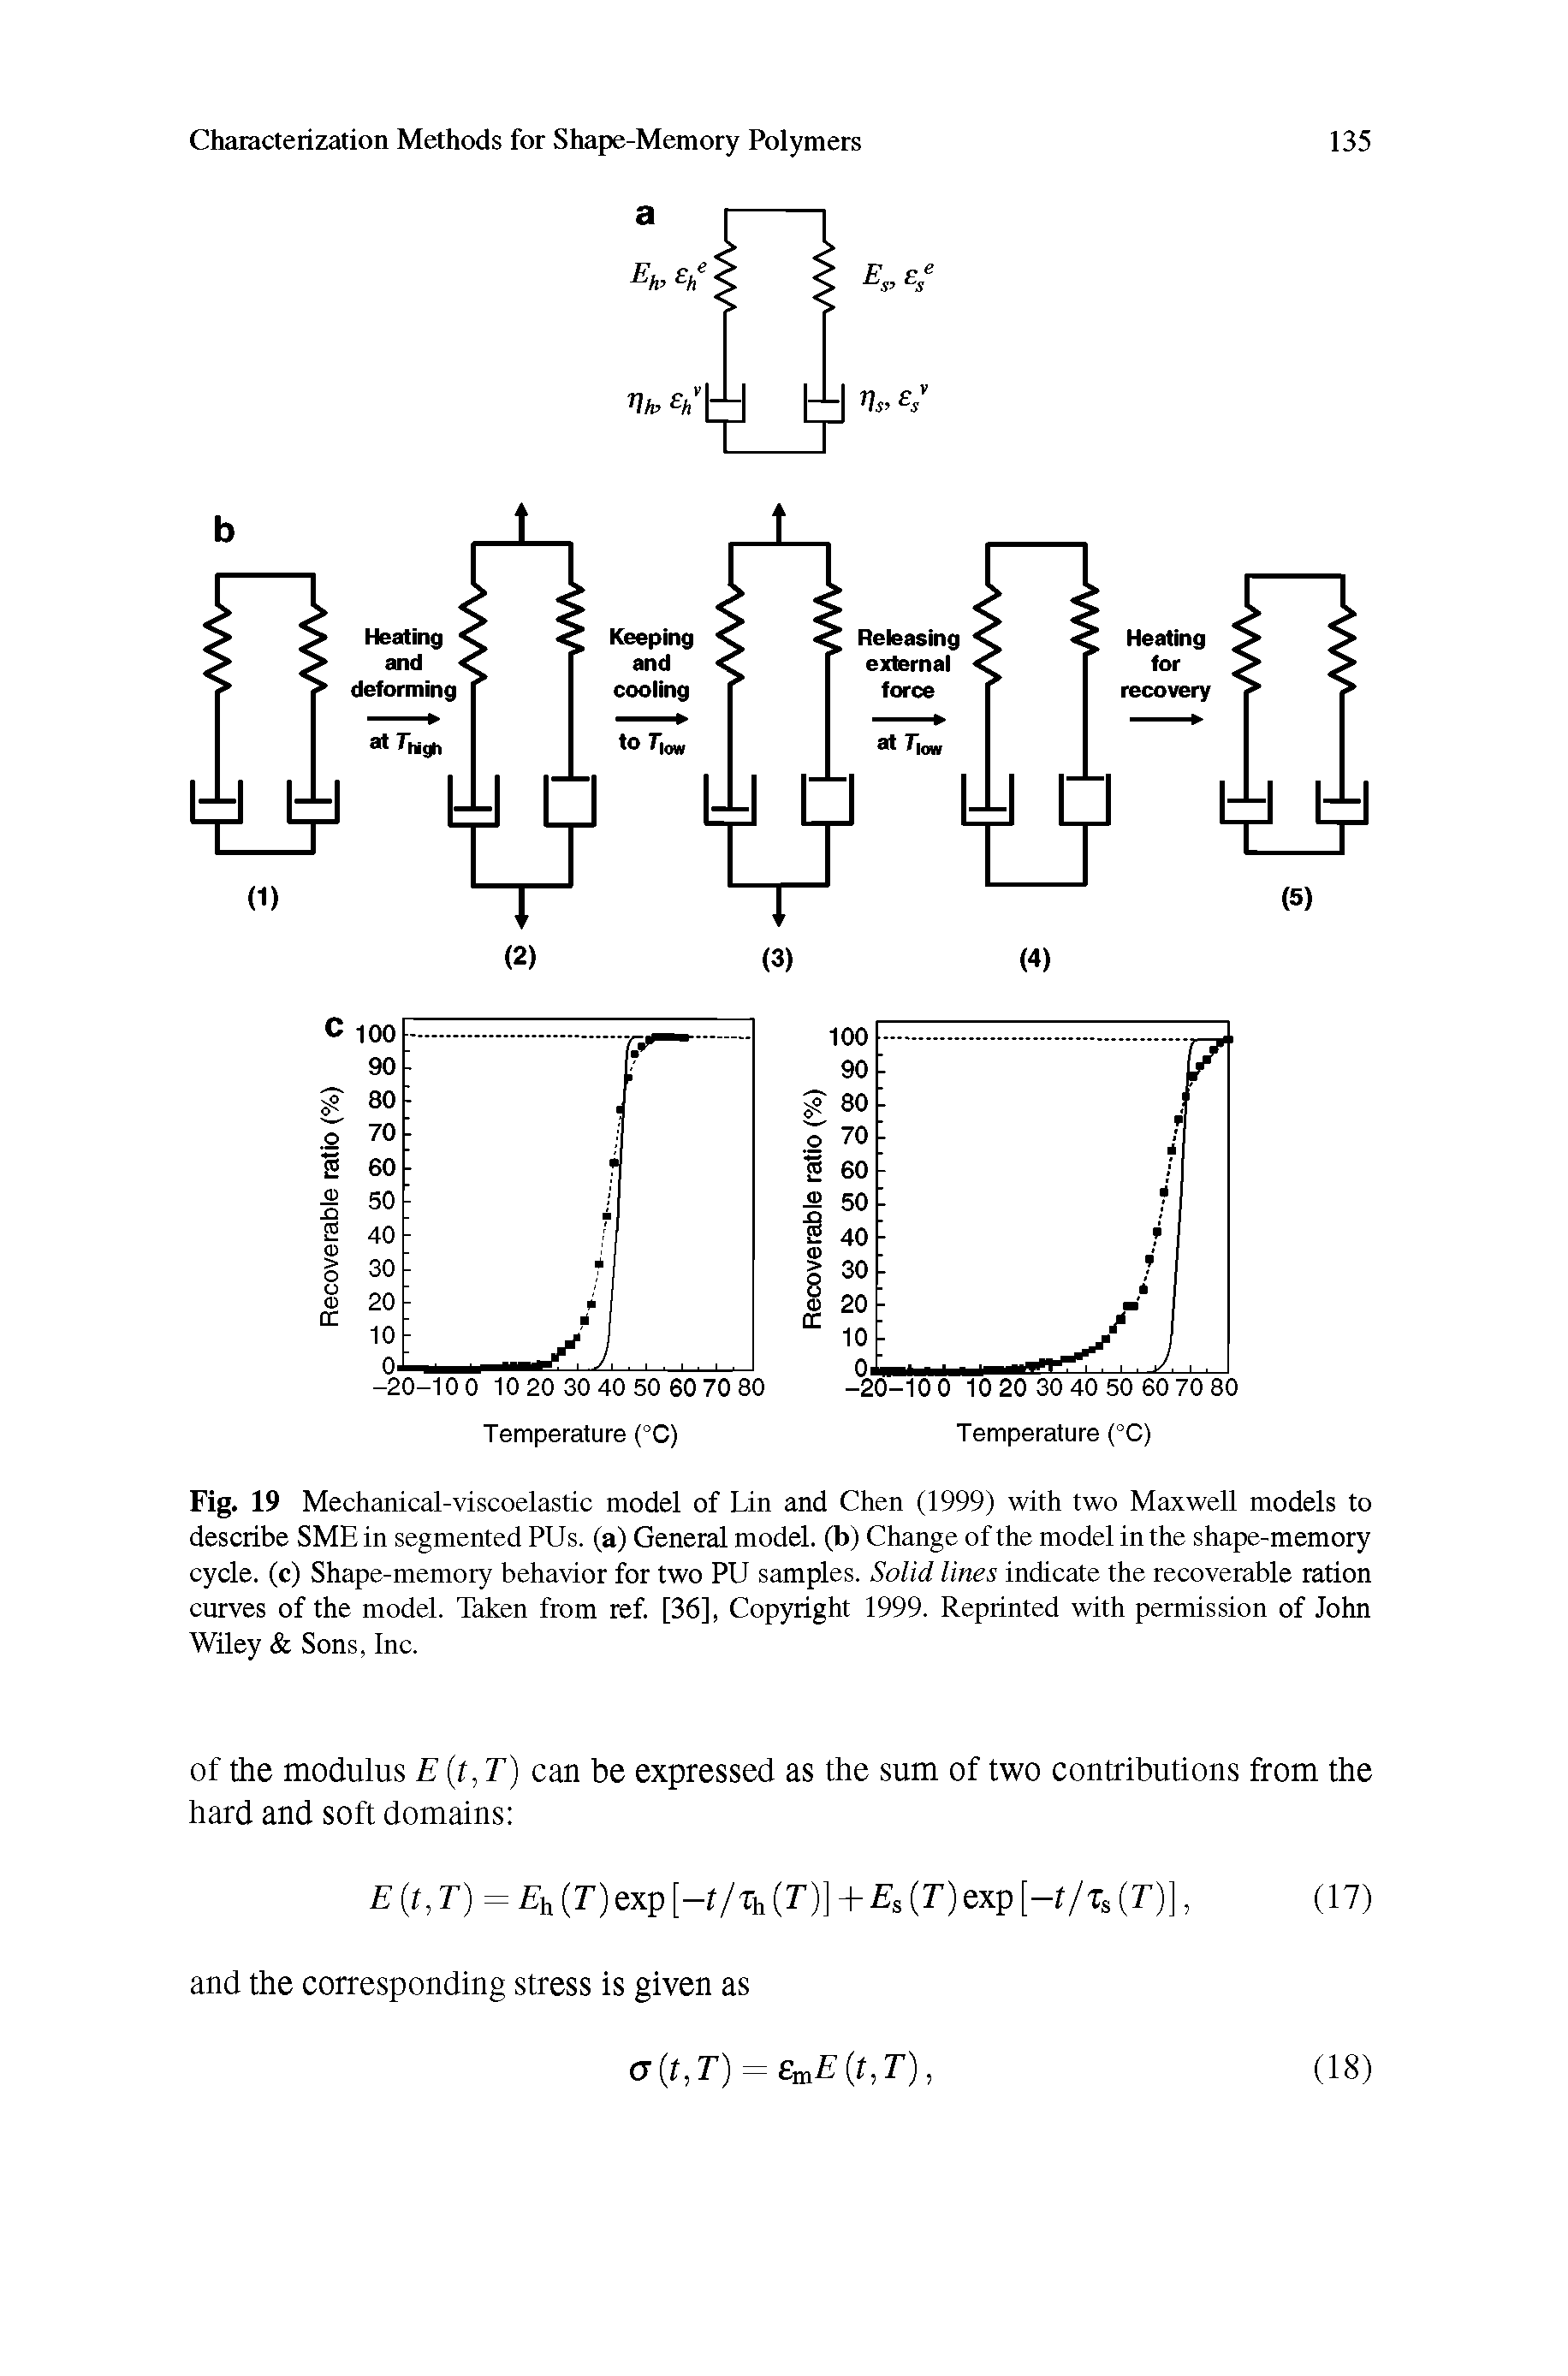 Fig. 19 Mechanical-viscoelastic model of Lin and Chen (1999) with two Maxwell models to describe SME in segmented PUs. (a) General model, (b) Change of the model in the shape-memory cycle, (c) Shape-memory behavior for two PU samples. Solid lines indicate the recoverable ration curves of the model. Taken from ref. [36], Copyright 1999. Reprinted with permission of John WUey Sons, Inc.